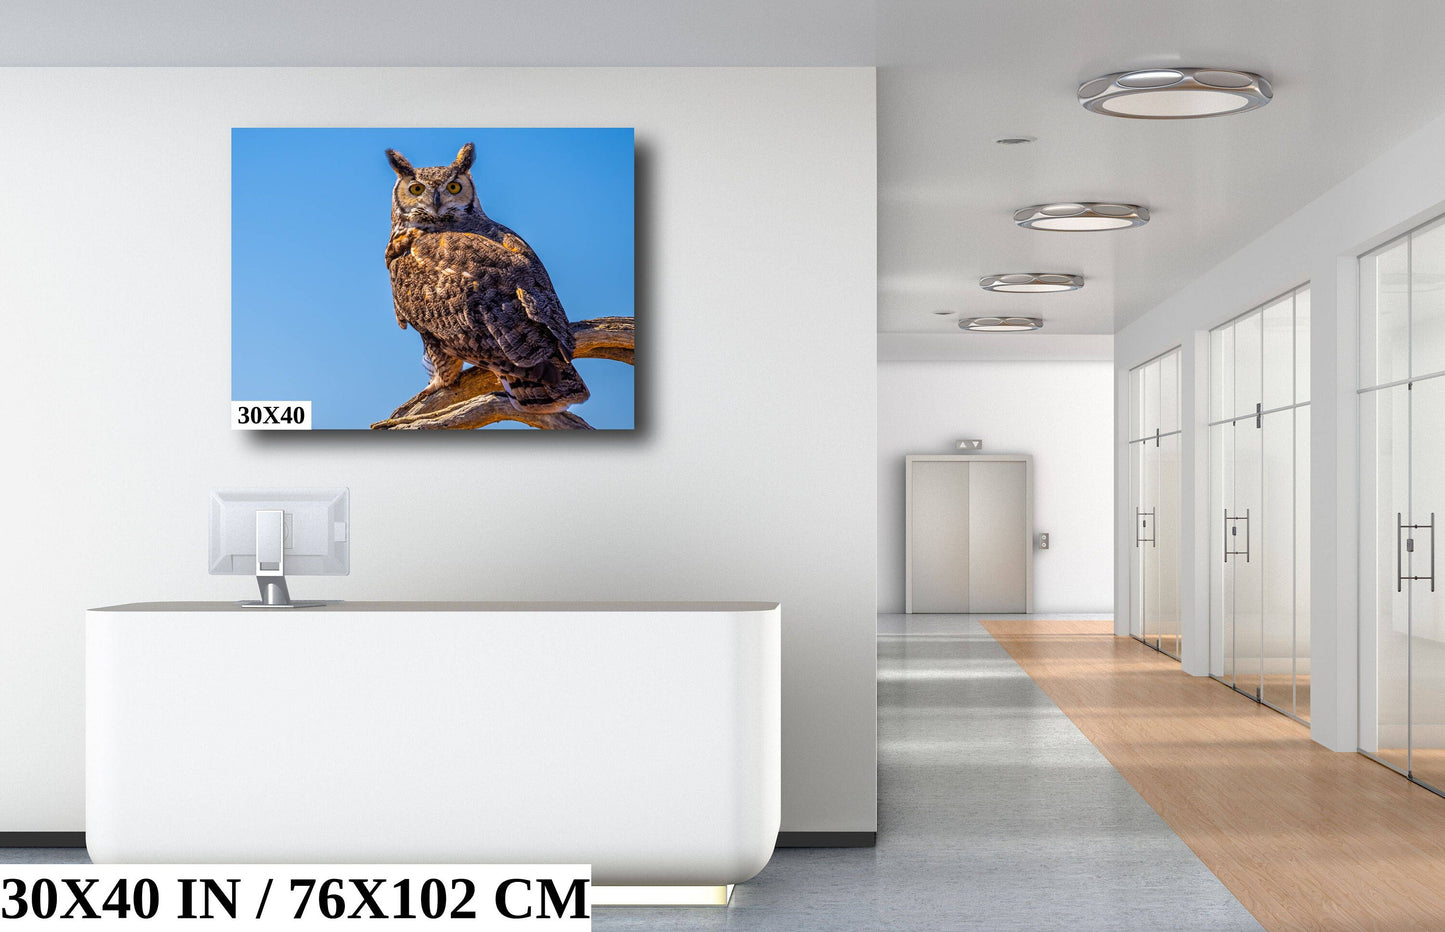 Twilight Guardian: Horned Owl On a Branch Wildlife Photography Wall Art Home Decor Metal Canvas Print